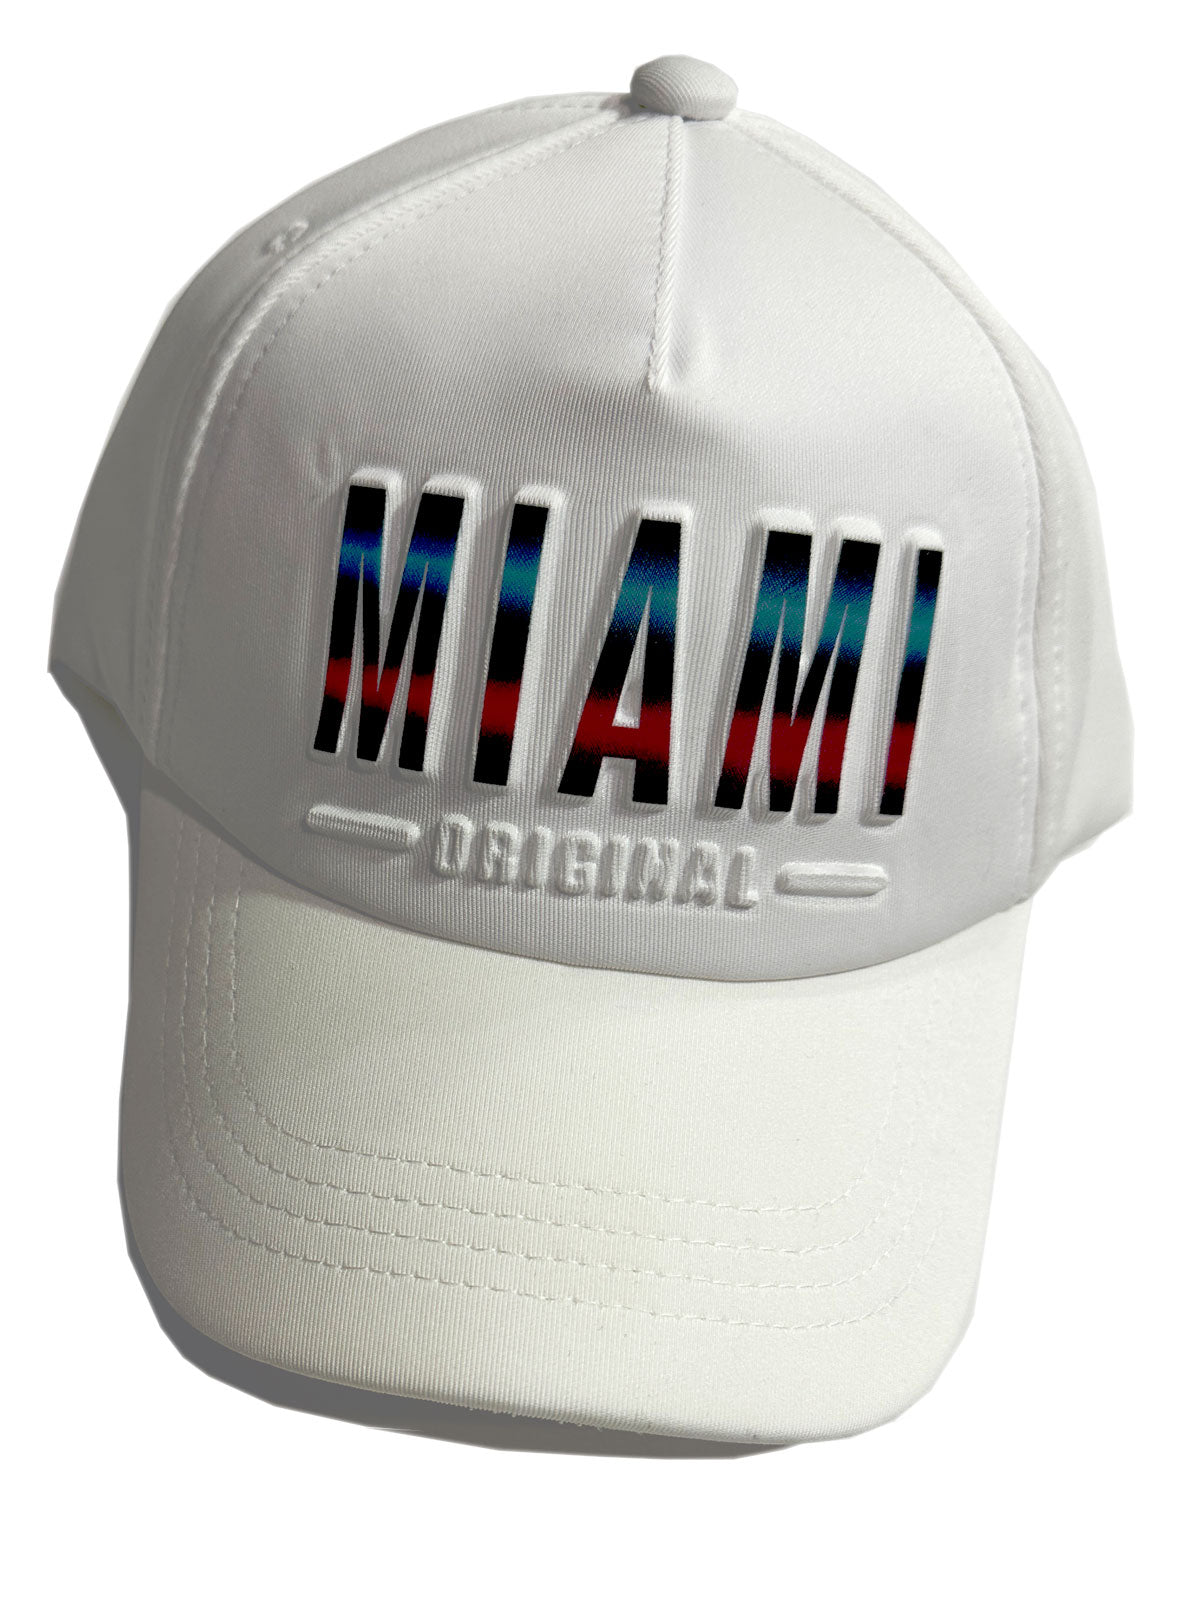 Miami Original Neon 3D Style Hats, Adult Size - One Size Fits Most, Dad or Mom Gift Miami Baseball Cap